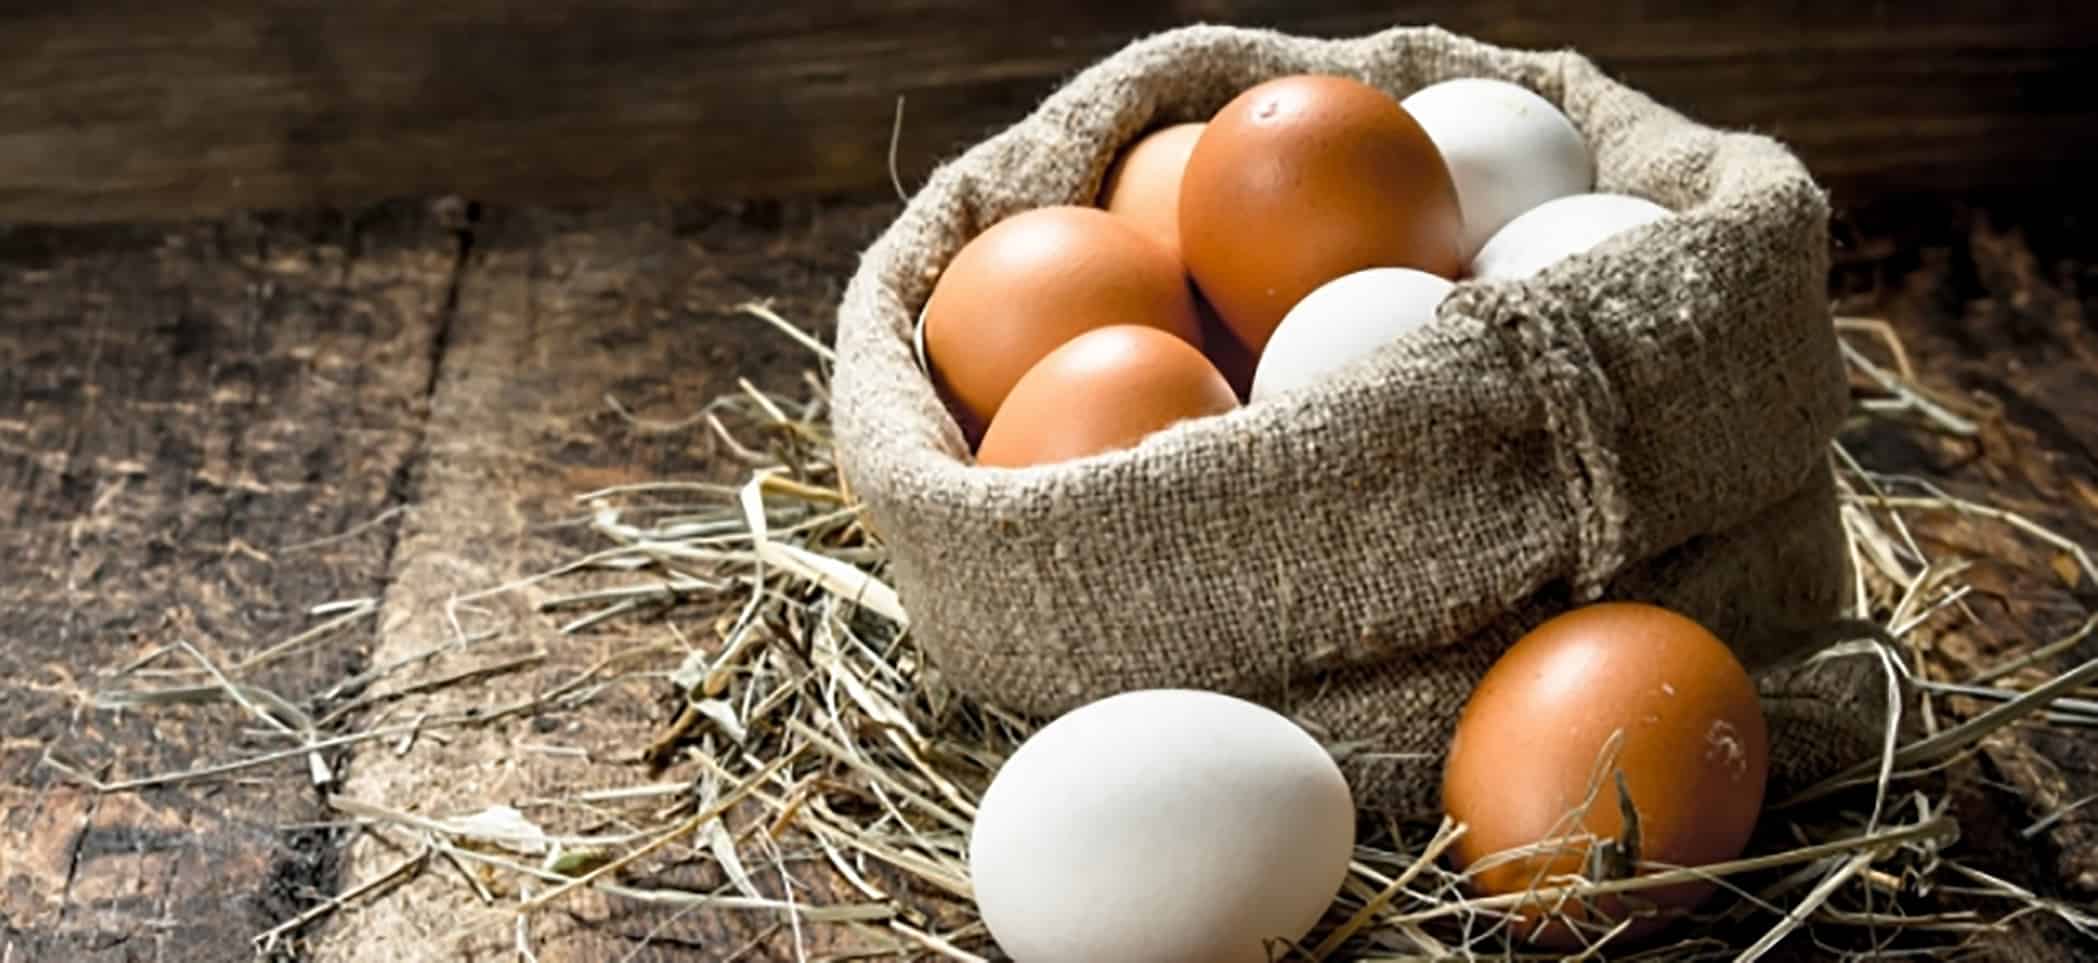 eggs in a burlap sack sitting on straw and wooden slats